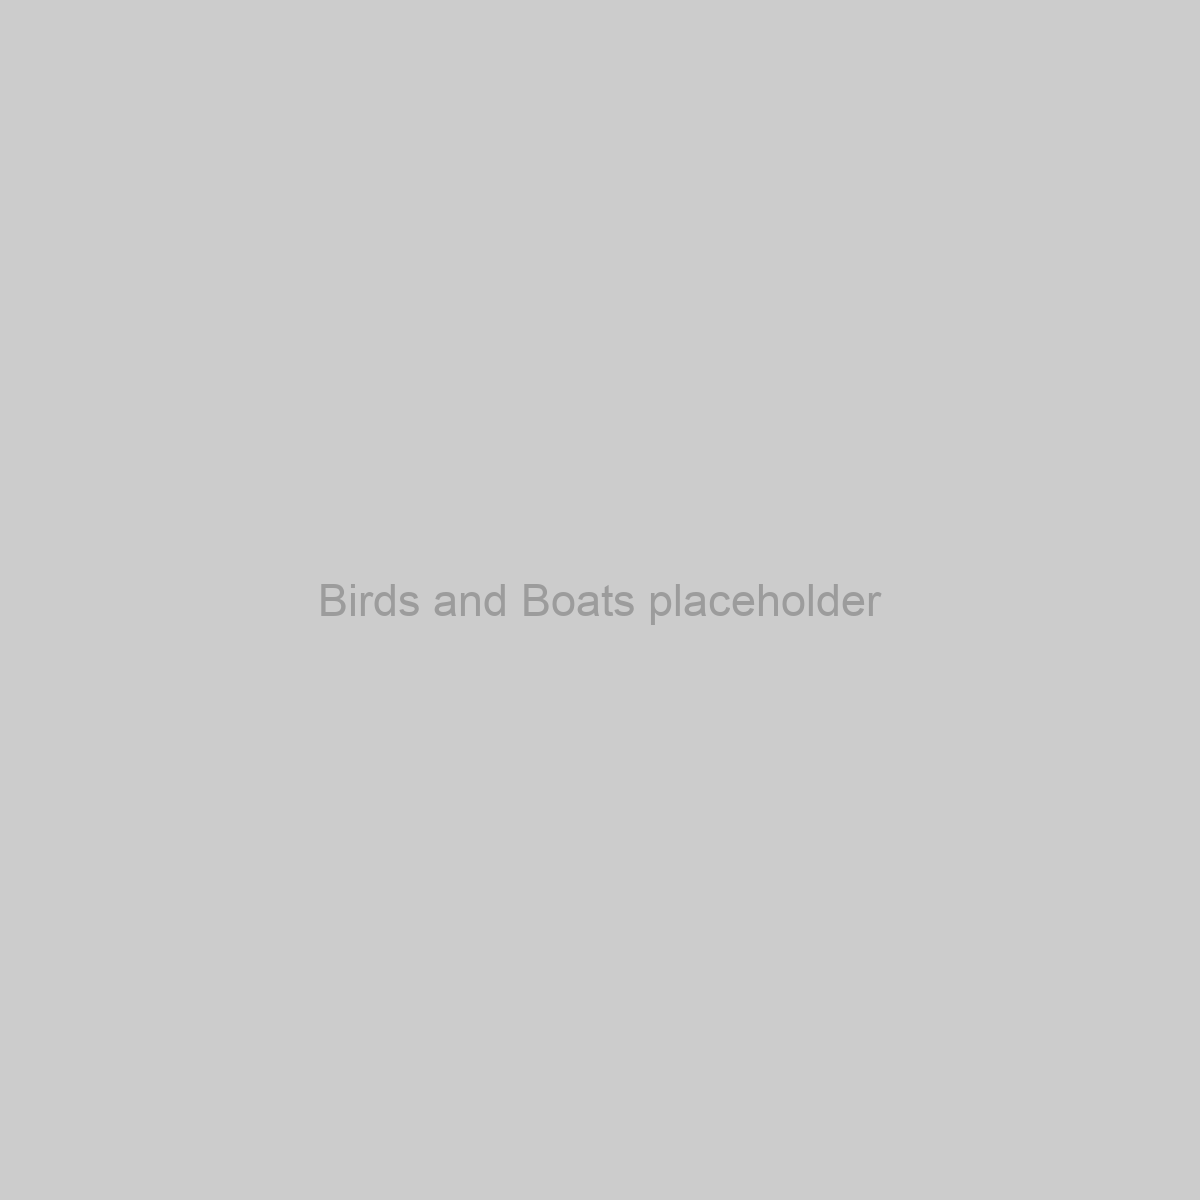 Birds and Boats Placeholder Image